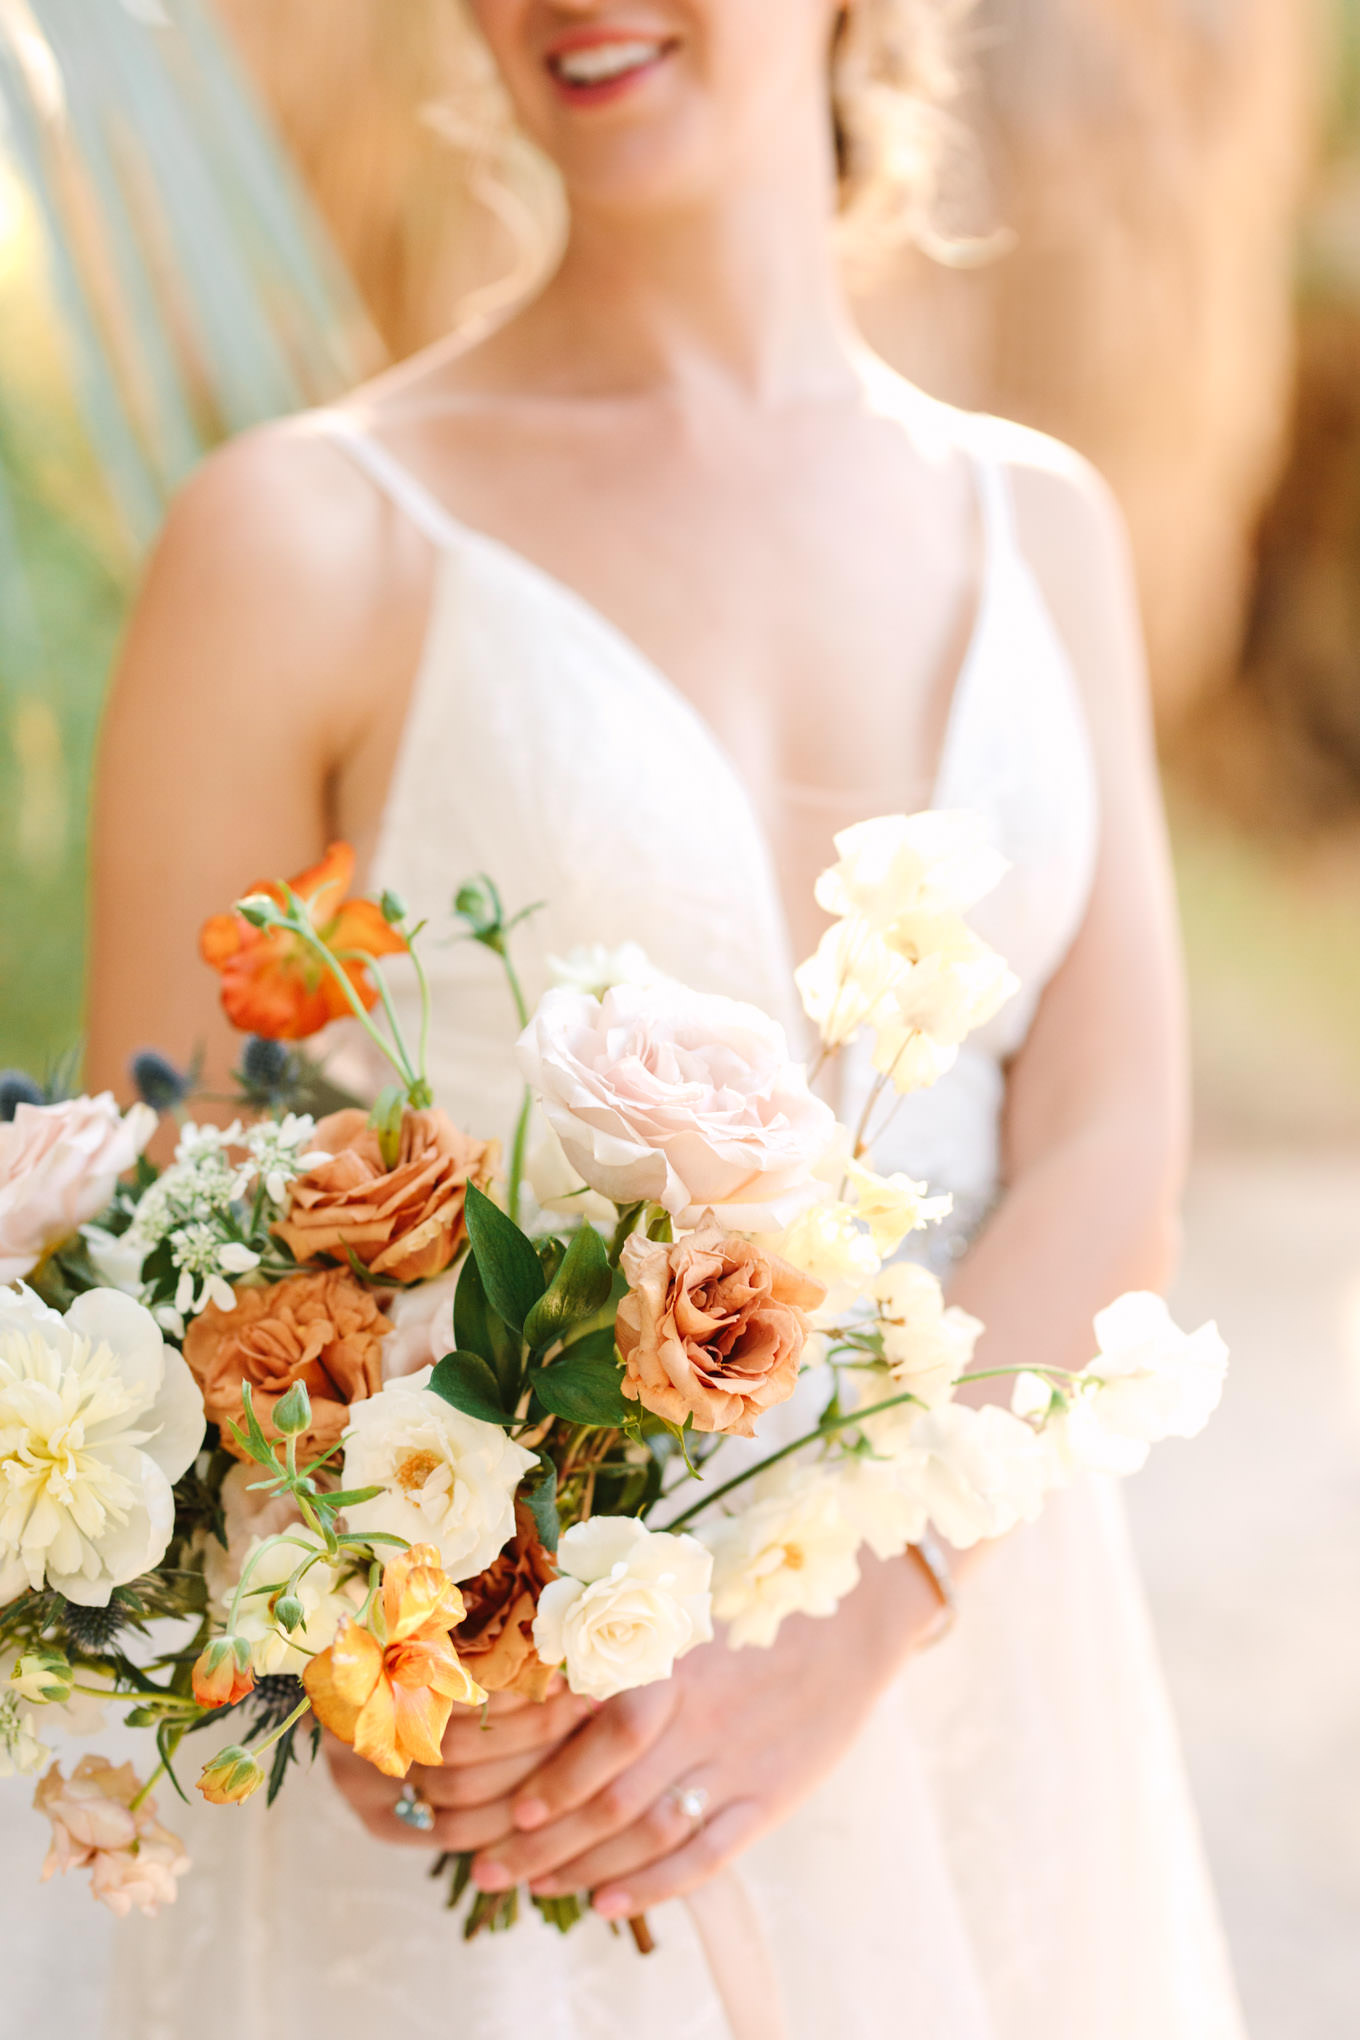 Colorful wedding bouquet | Living Desert Zoo & Gardens wedding with unique details | Elevated and colorful wedding photography for fun-loving couples in Southern California |  #PalmSprings #palmspringsphotographer #gardenwedding #palmspringswedding  Source: Mary Costa Photography | Los Angeles wedding photographer 